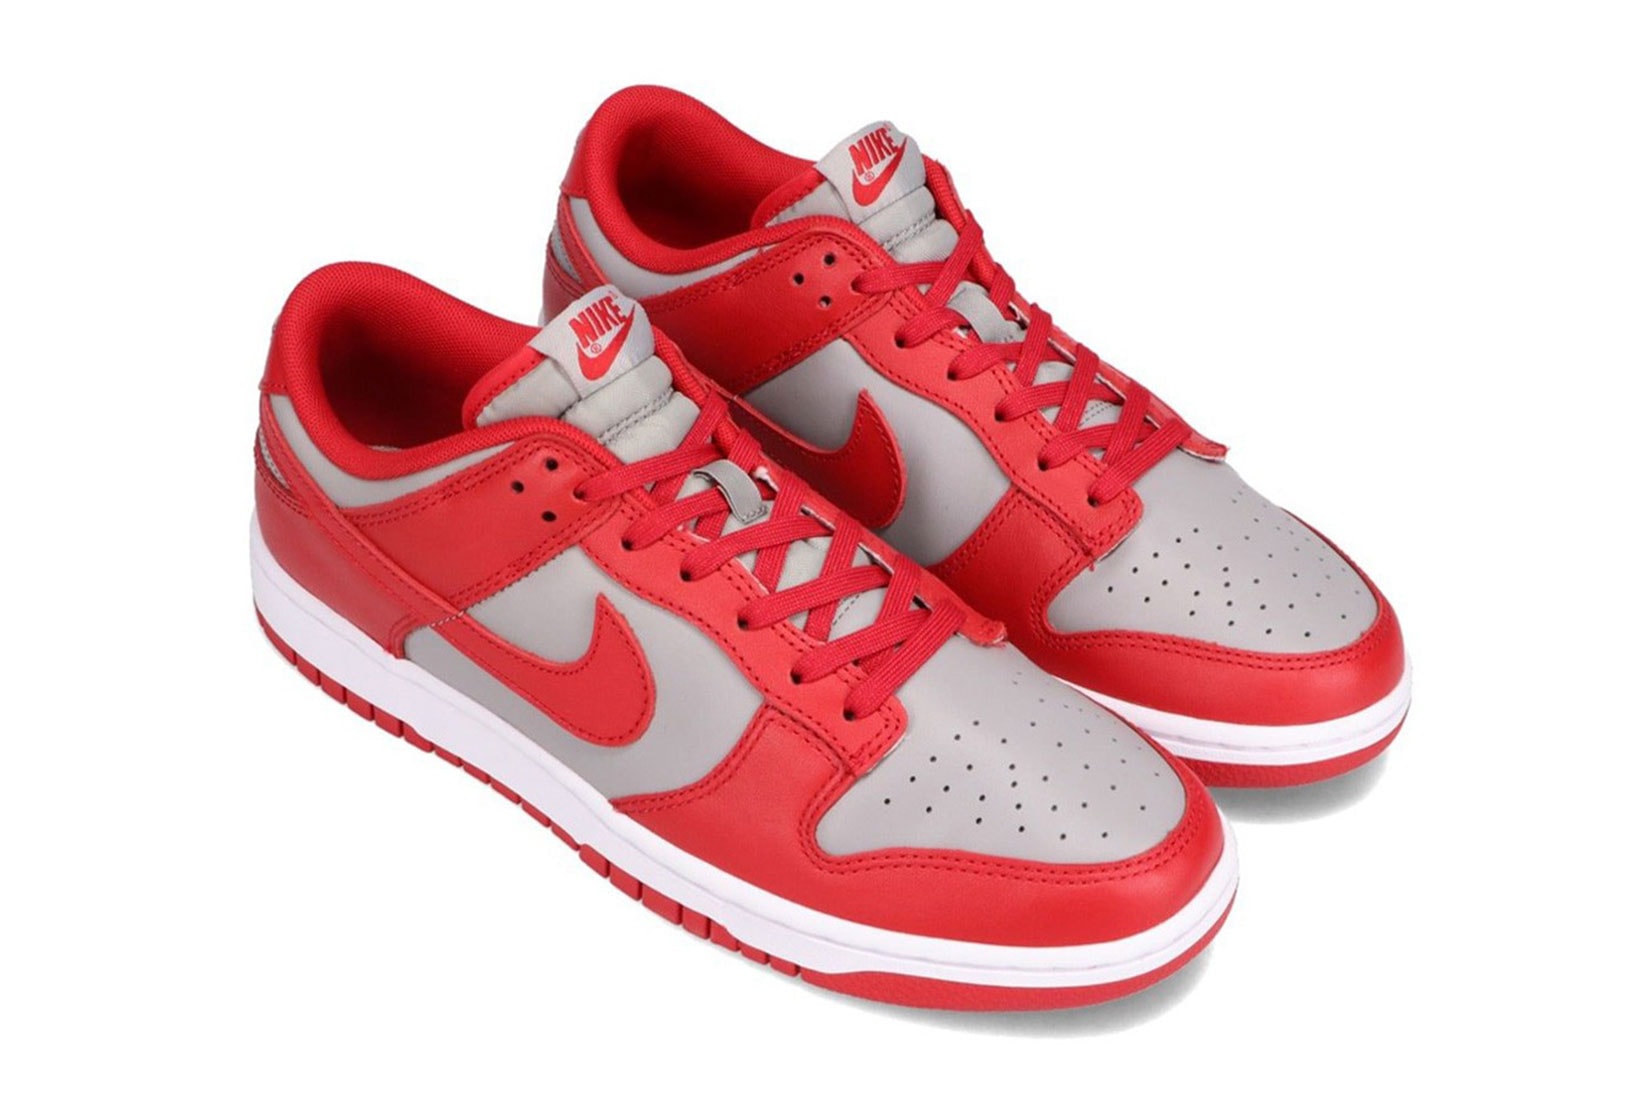 nike dunk low new colorway 2021 release unlv red light gray grey